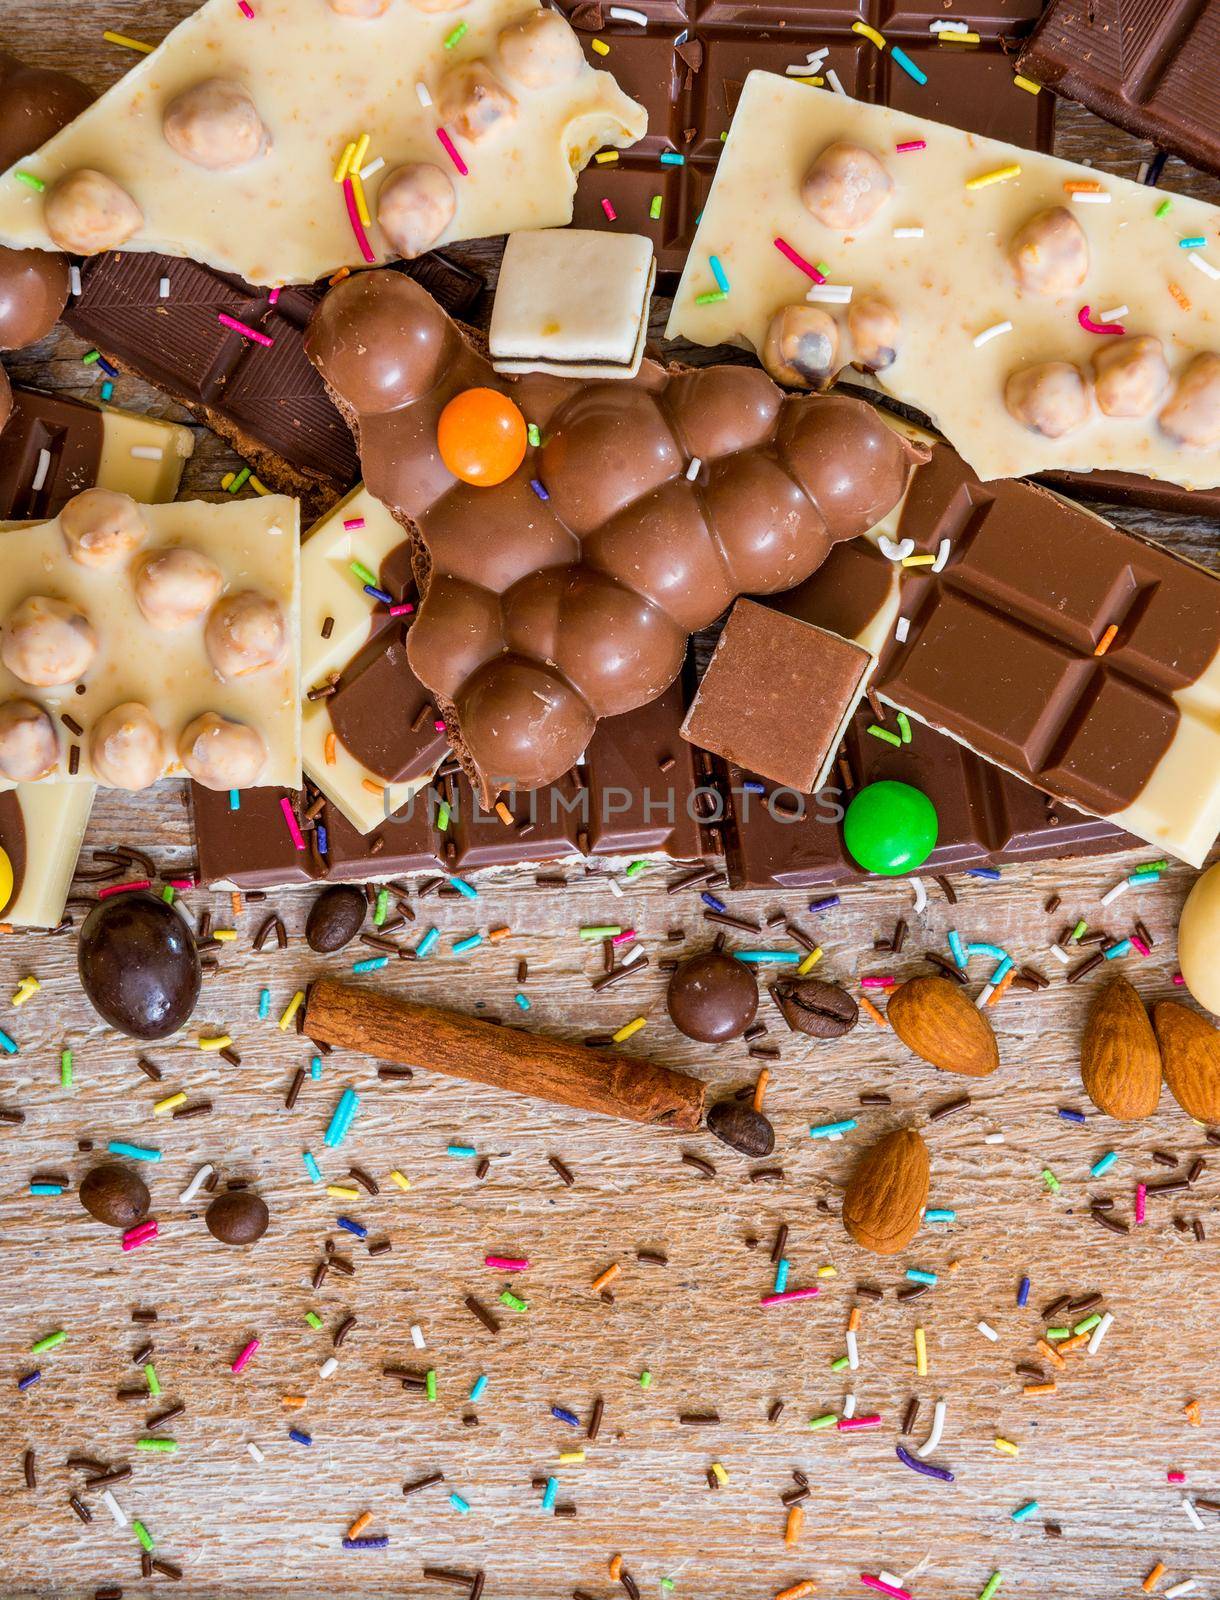 chocolate and candies on a wooden background